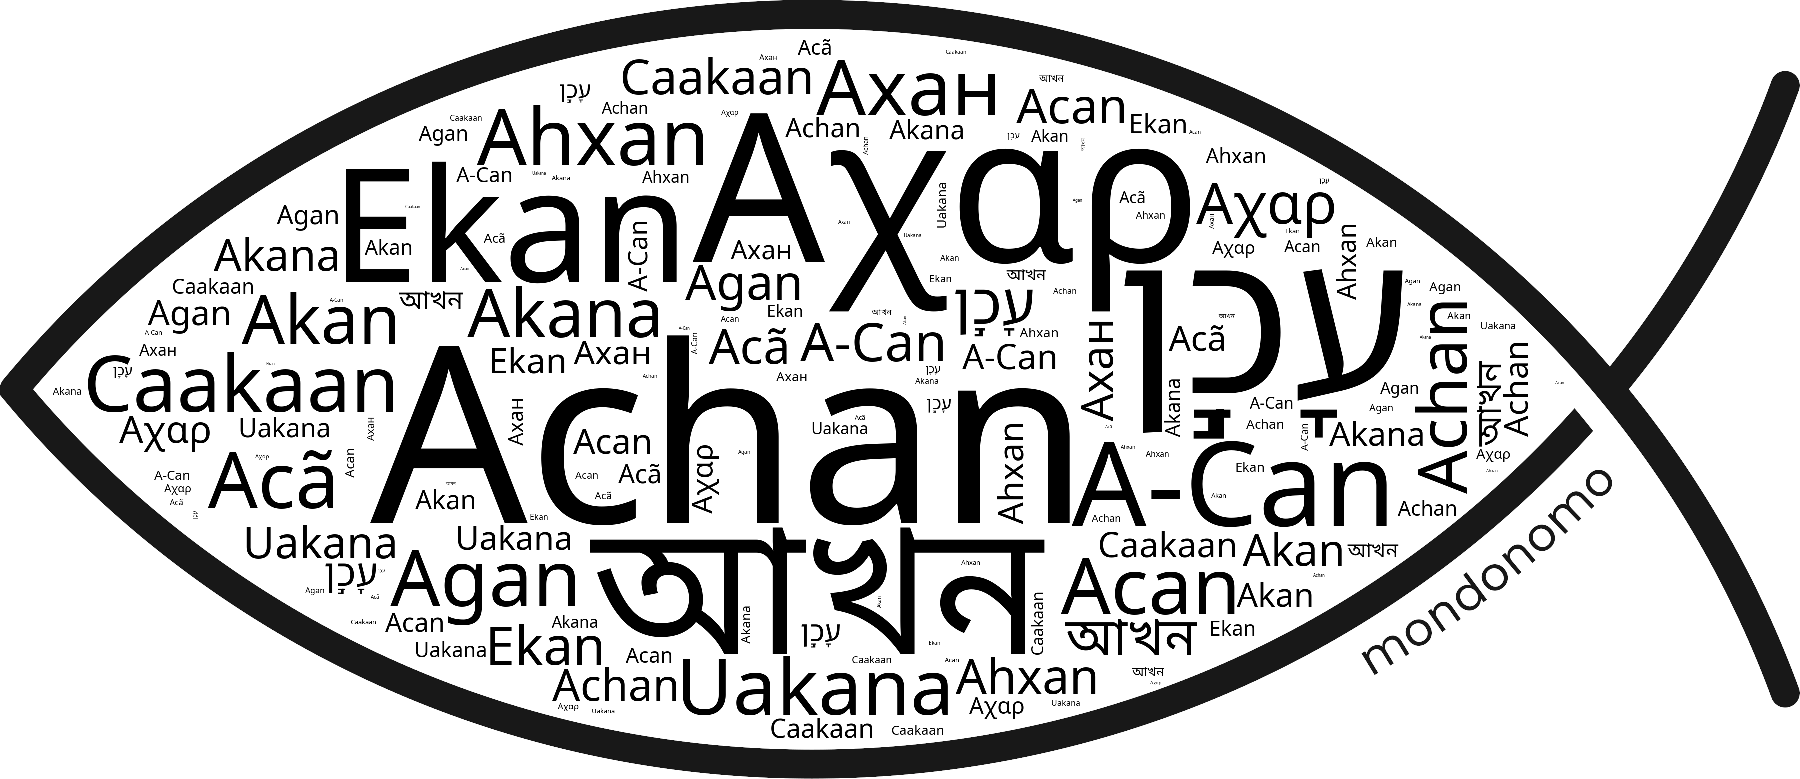 Name Achan in the world's Bibles